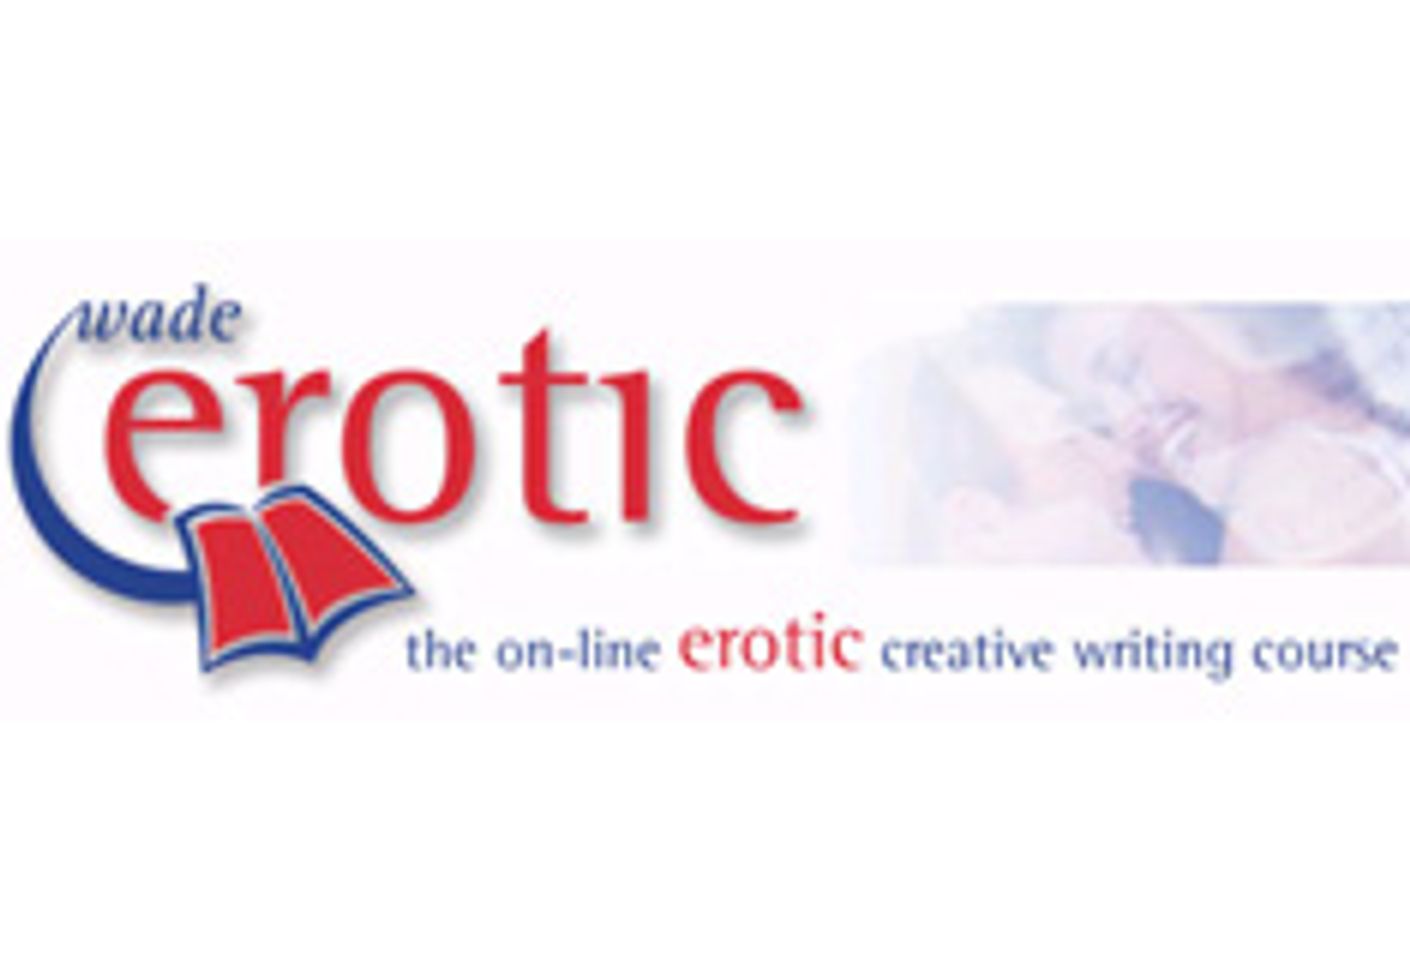 First Online Creative Erotic Writing Course Launched